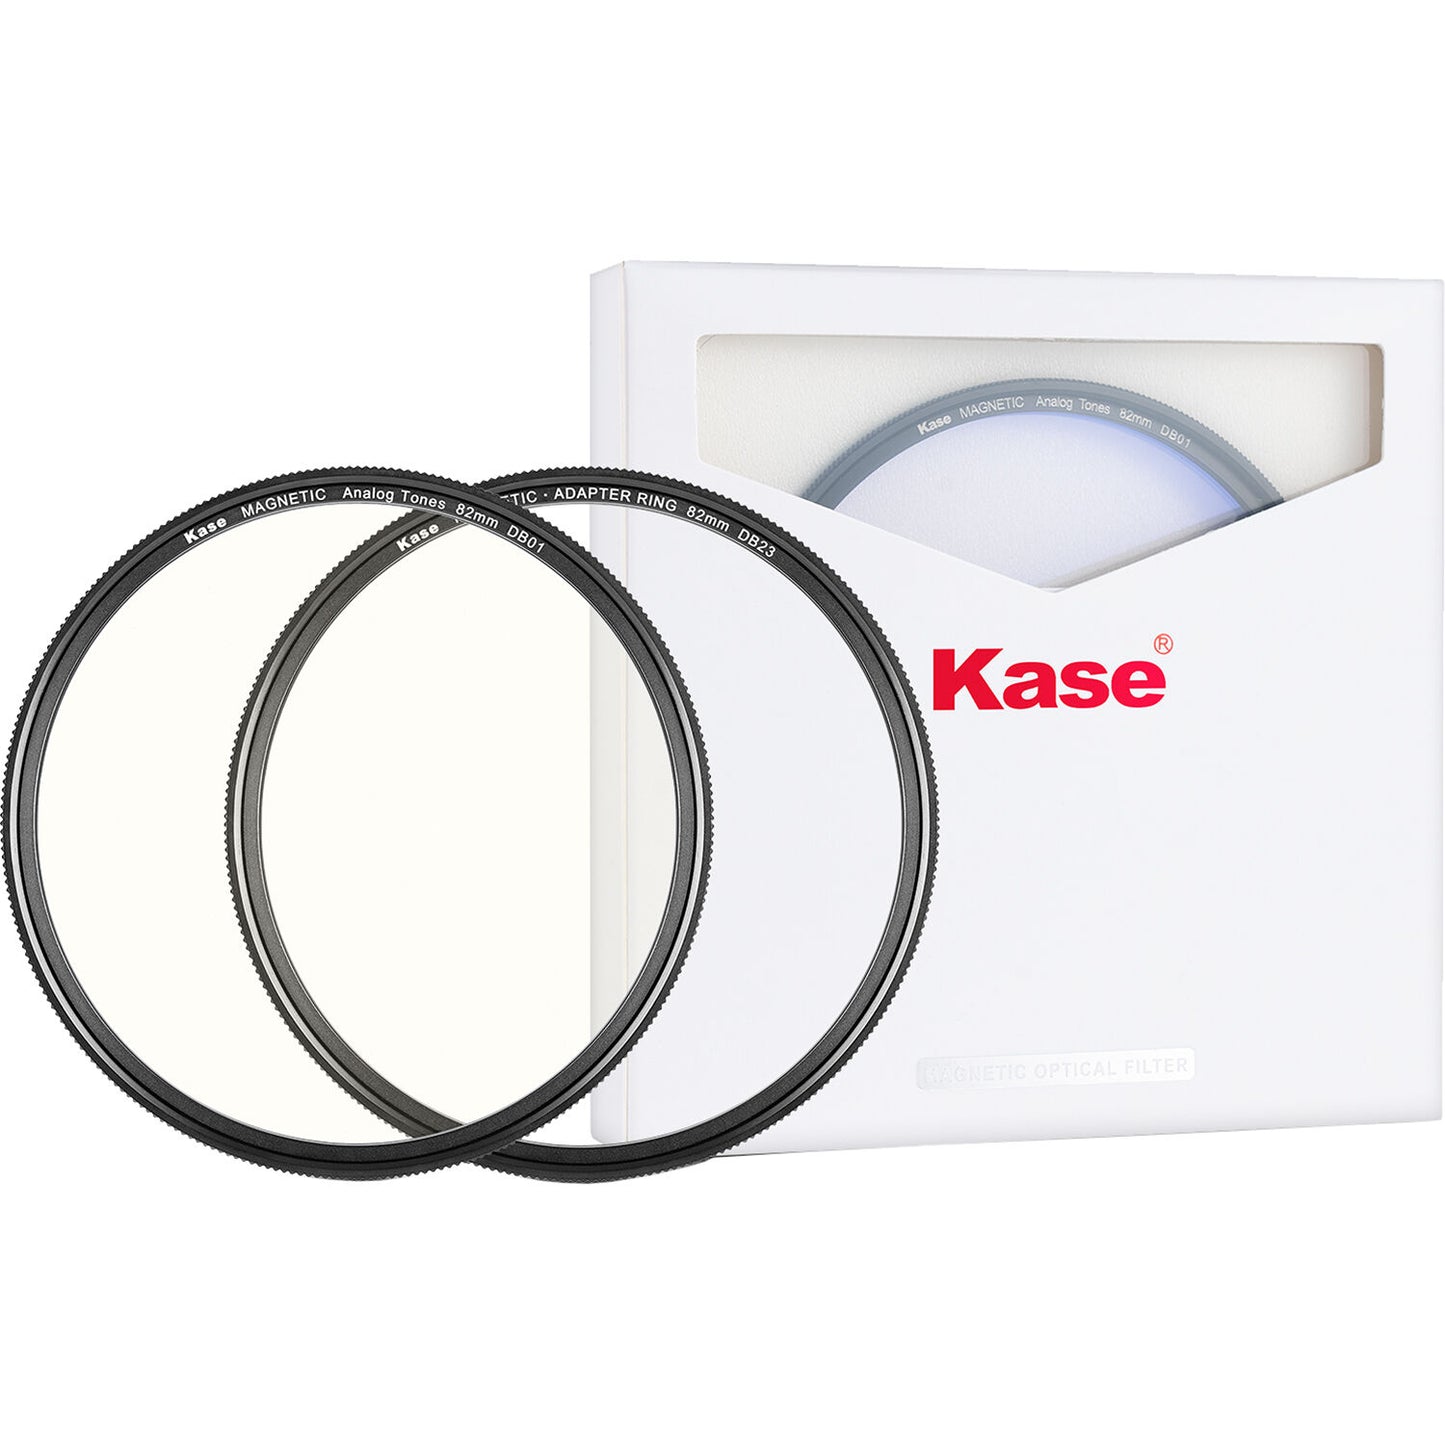 Kase Magnetic Analog Tones Filter and Adapter (82mm)